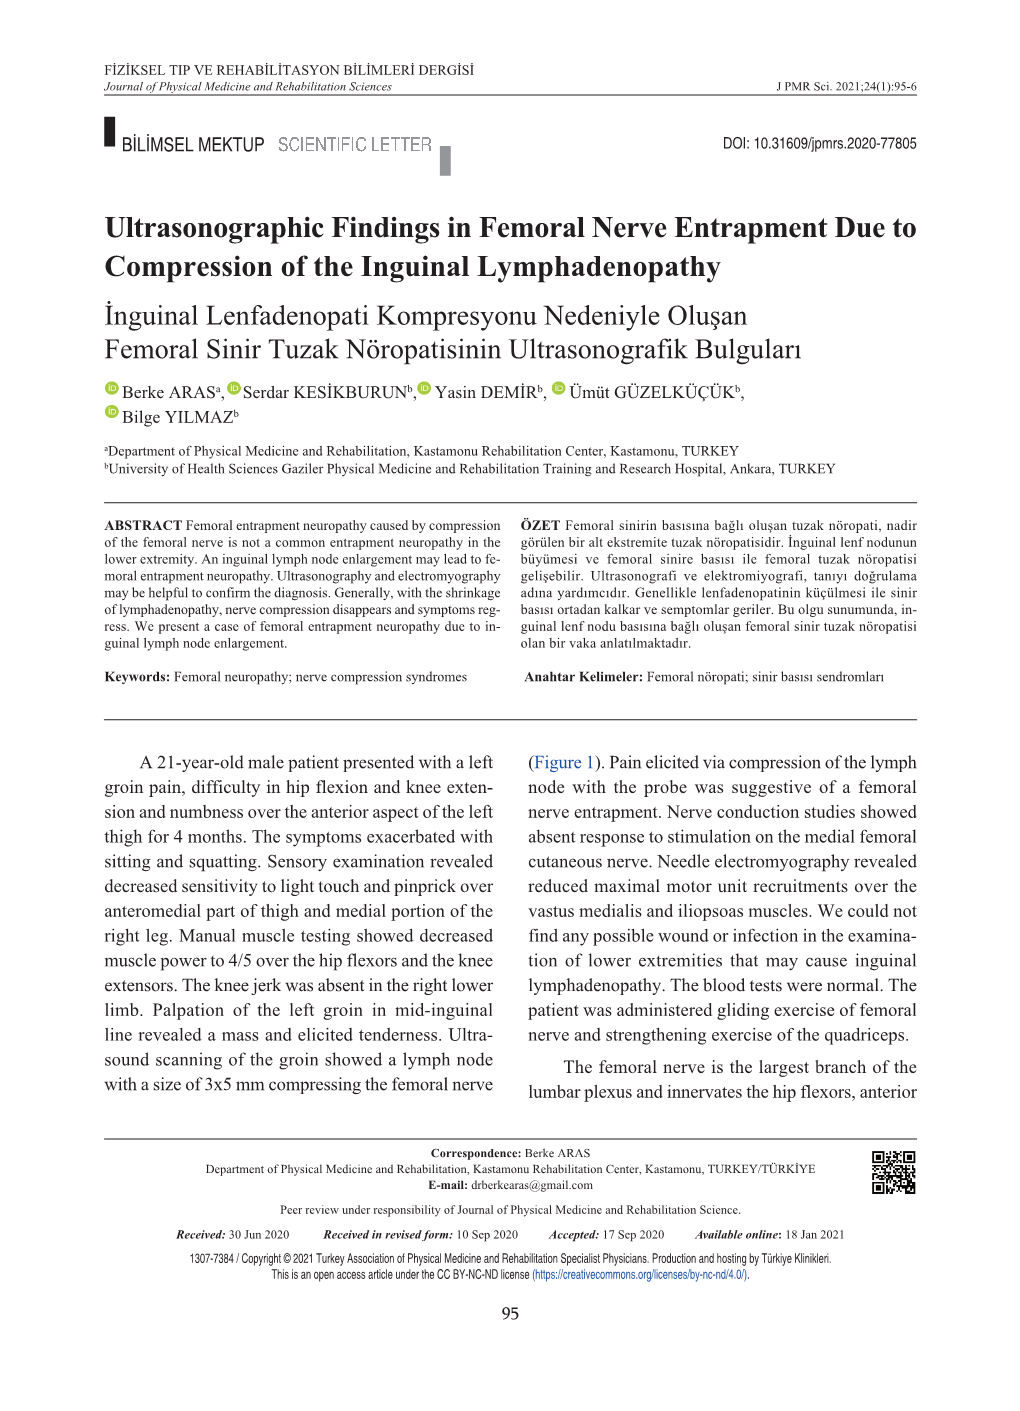 Ultrasonographic Findings in Femoral Nerve Entrapment Due